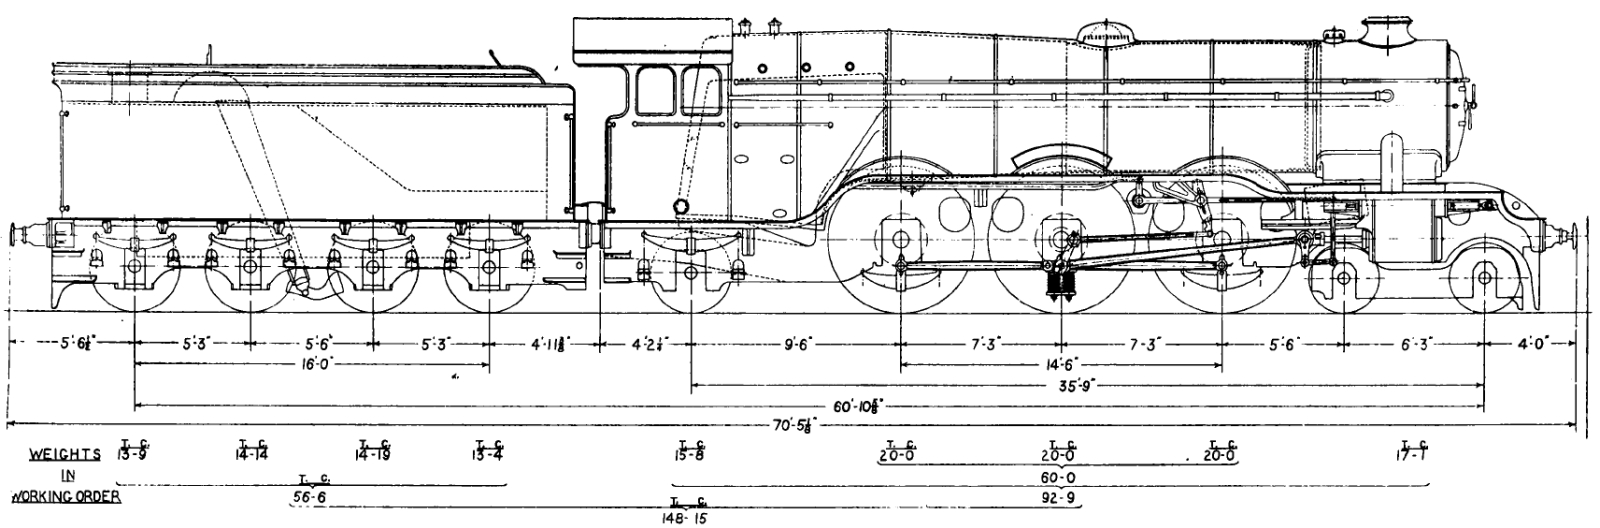 Schematic drawing of the A1 with dimensions